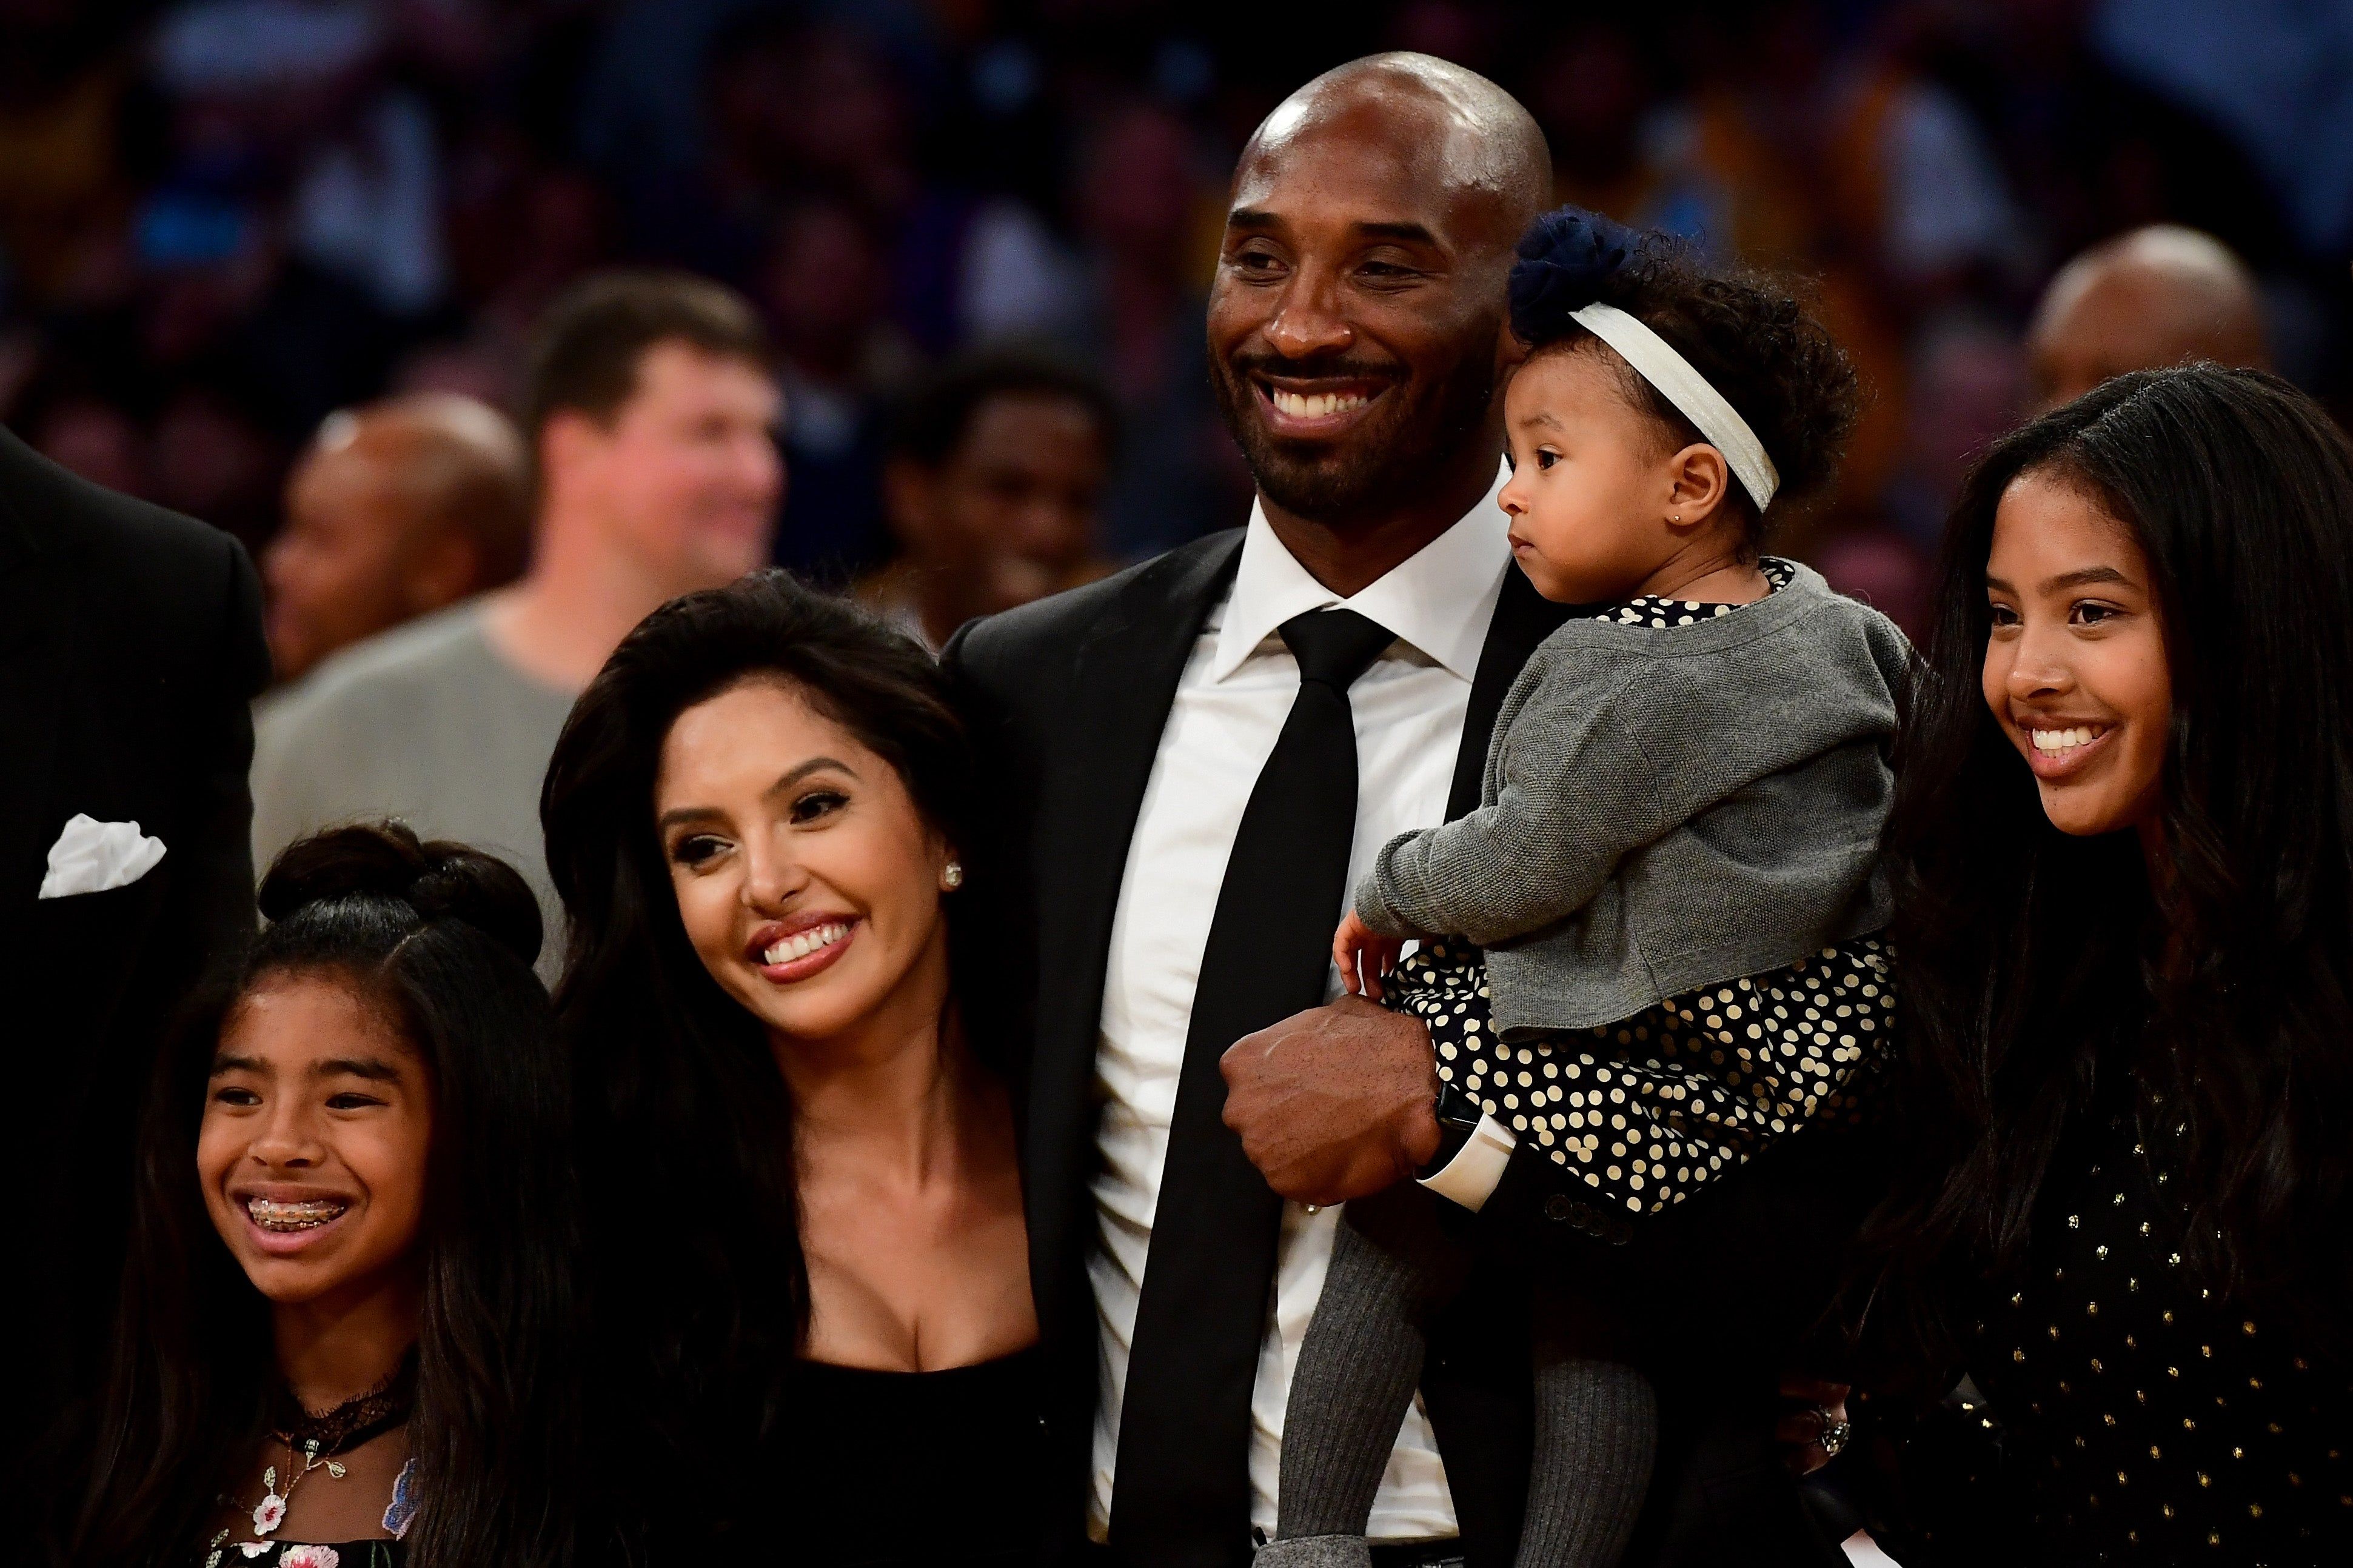 Remembering Basketball Legend Kobe Bryant And His Daughter, Gianna